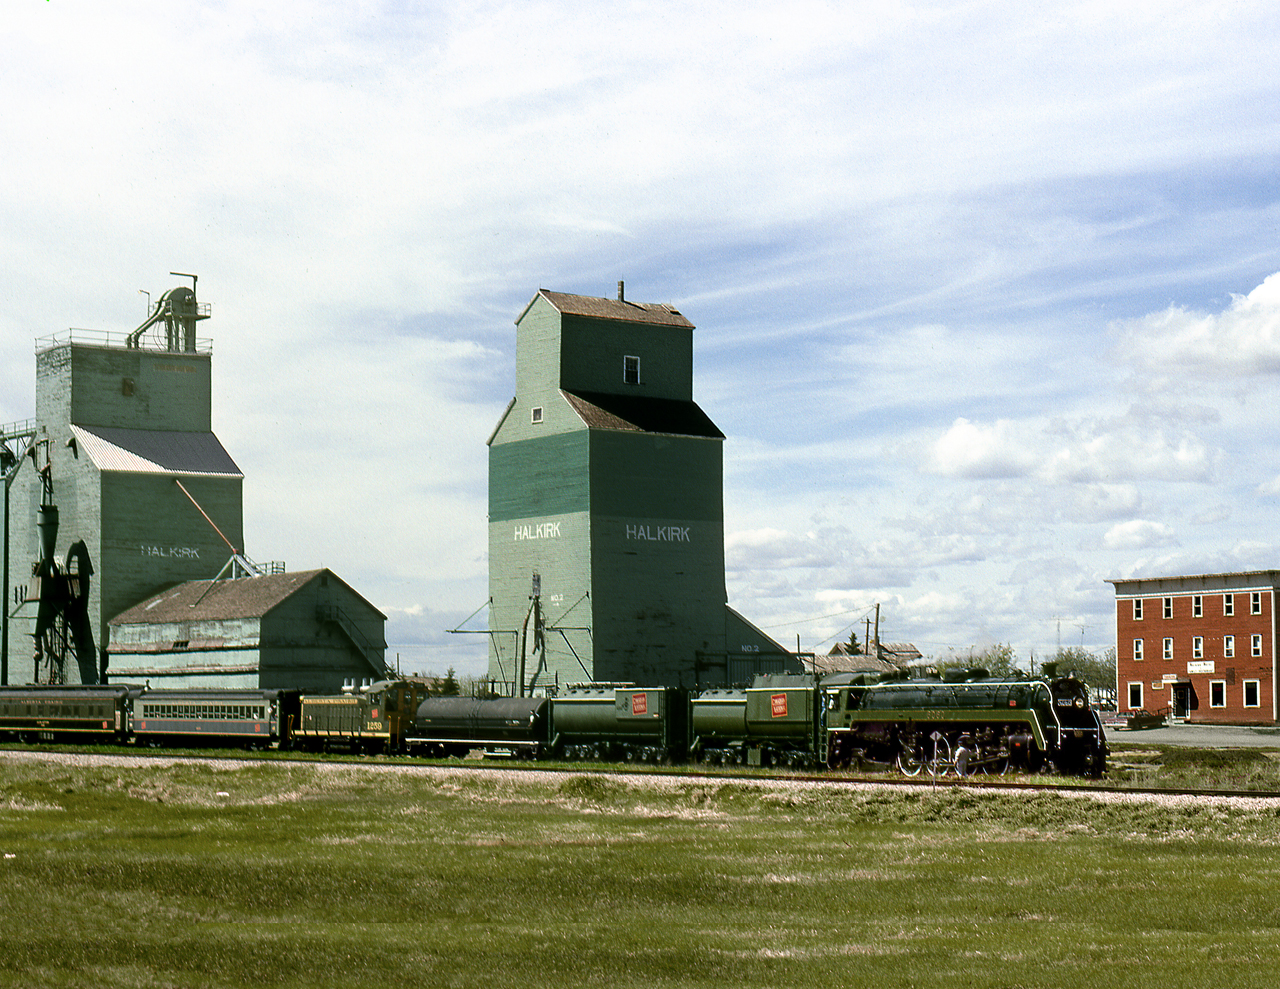 After being out of service for 10 years, ex CN 4-8-2 6060 makes its first run under auspices of the Alberta Prairie Railway on Central Western's ex CP Lacombe Sub. from Stettler to Coronation. The eastbound trip stops at Halkirk for servicing